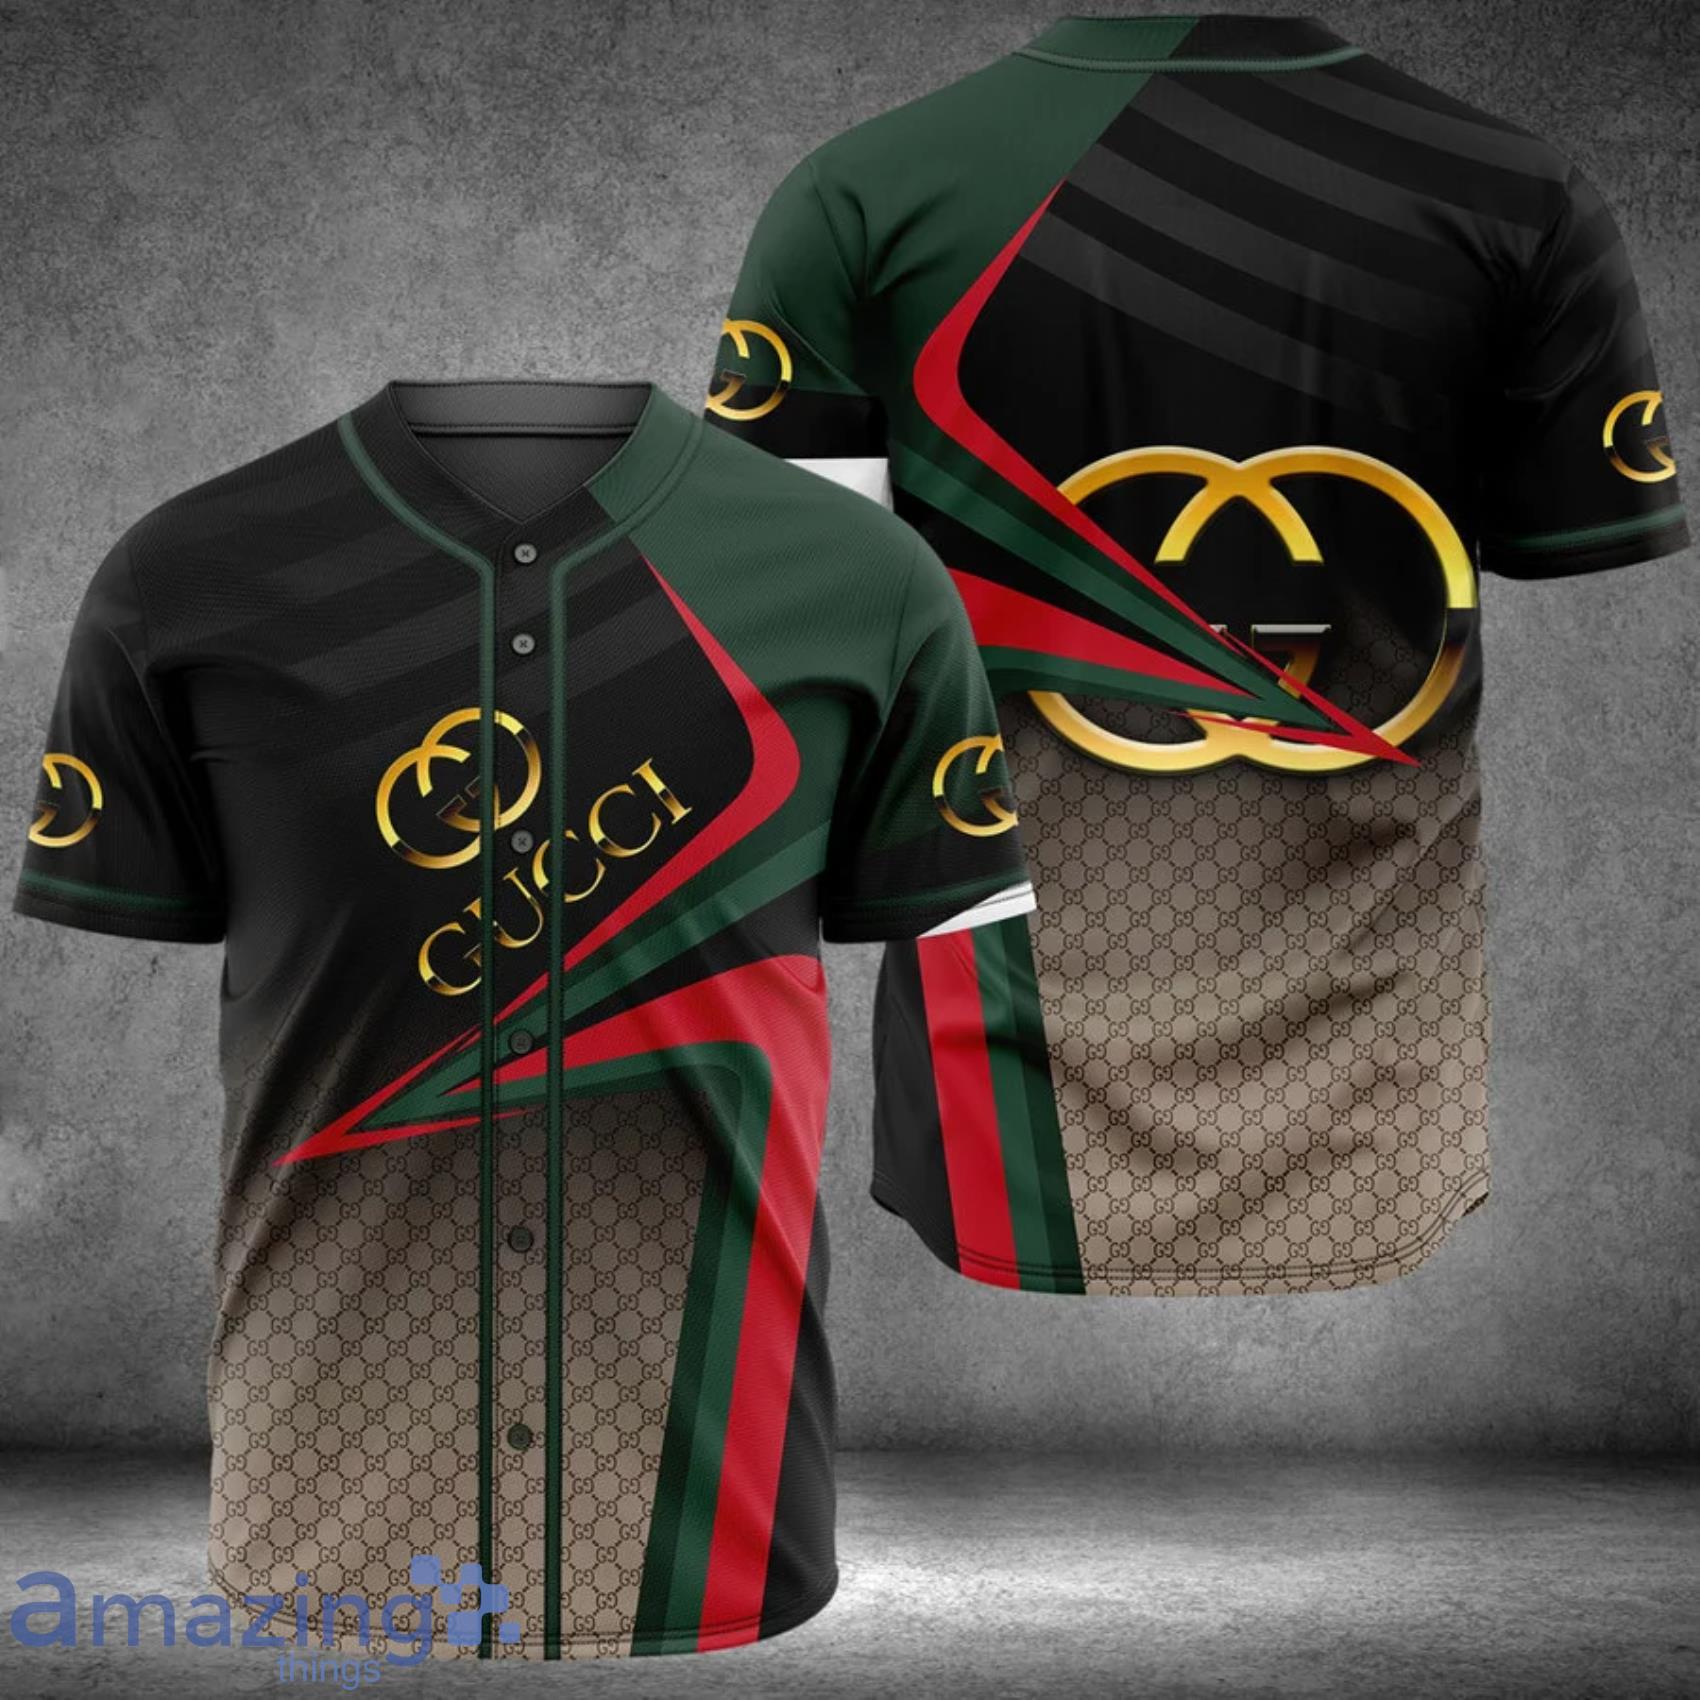 Gucci Black Style 1 Baseball Jersey Clothes Sport For Men Women